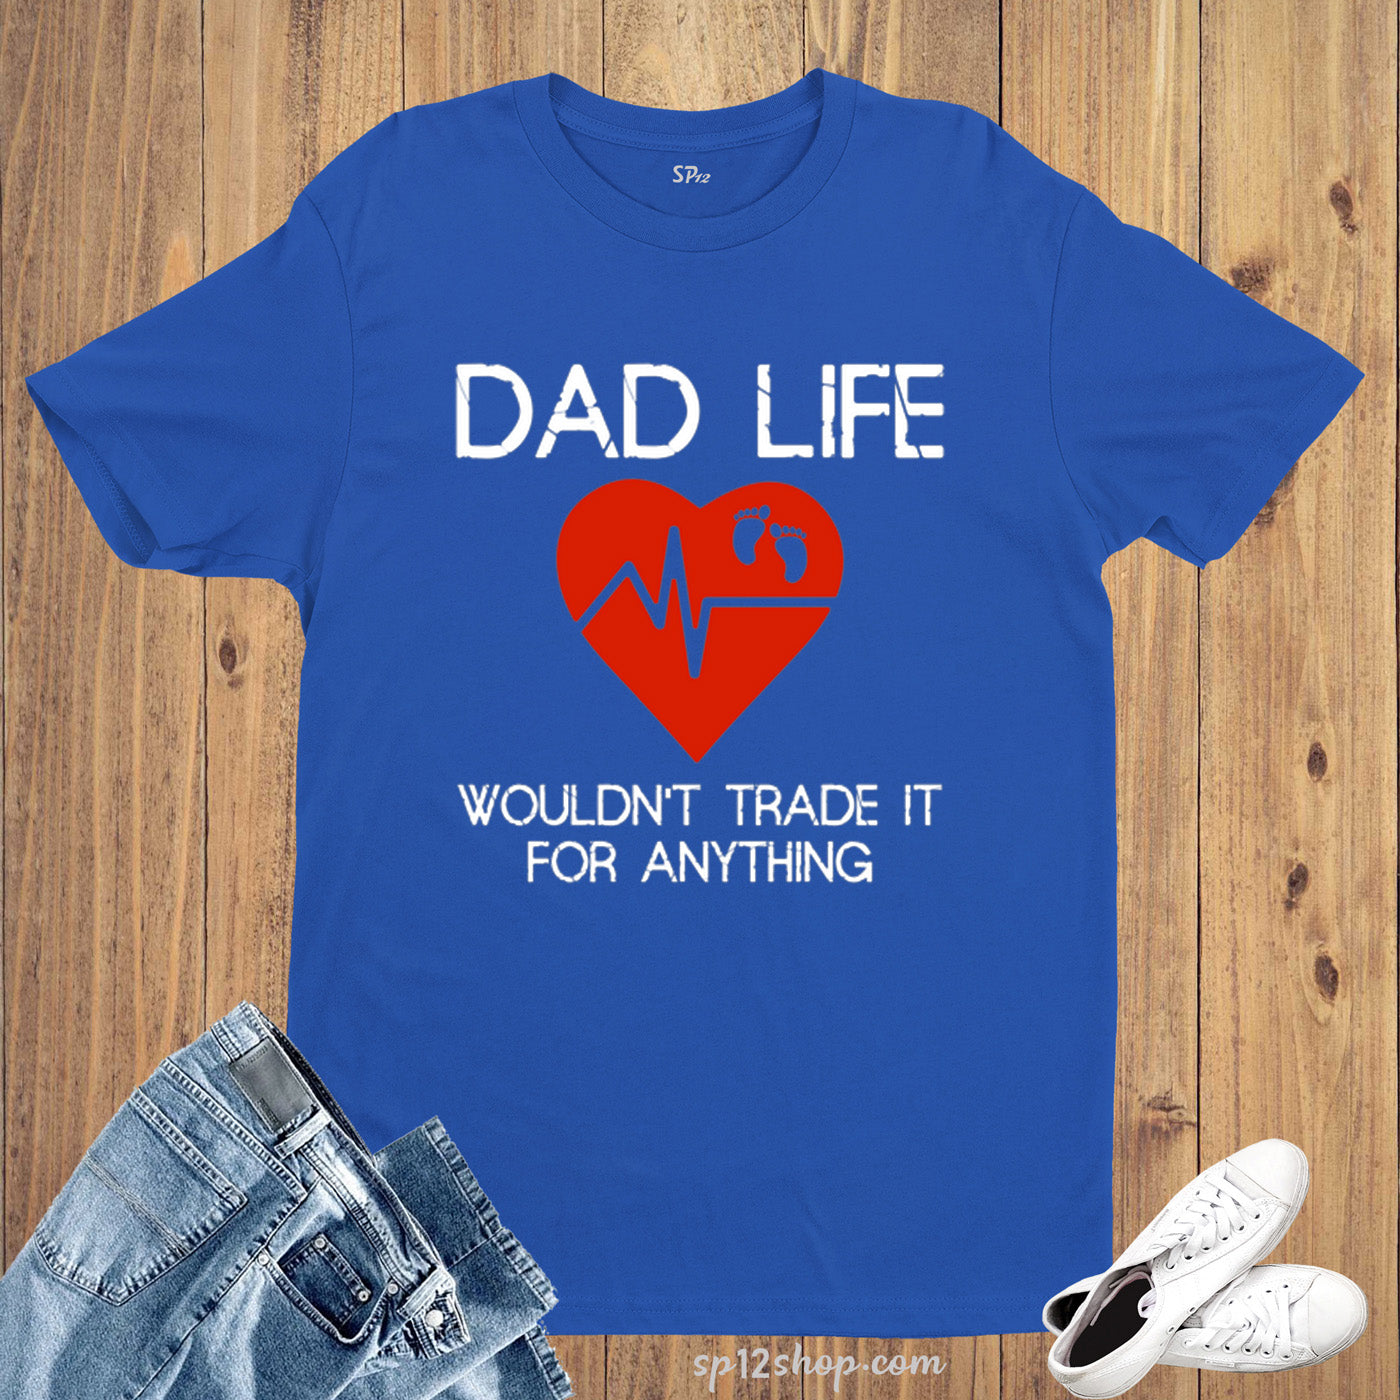 Family Daddy T Shirt Happy Fathers Day Dads Life tshirt tee